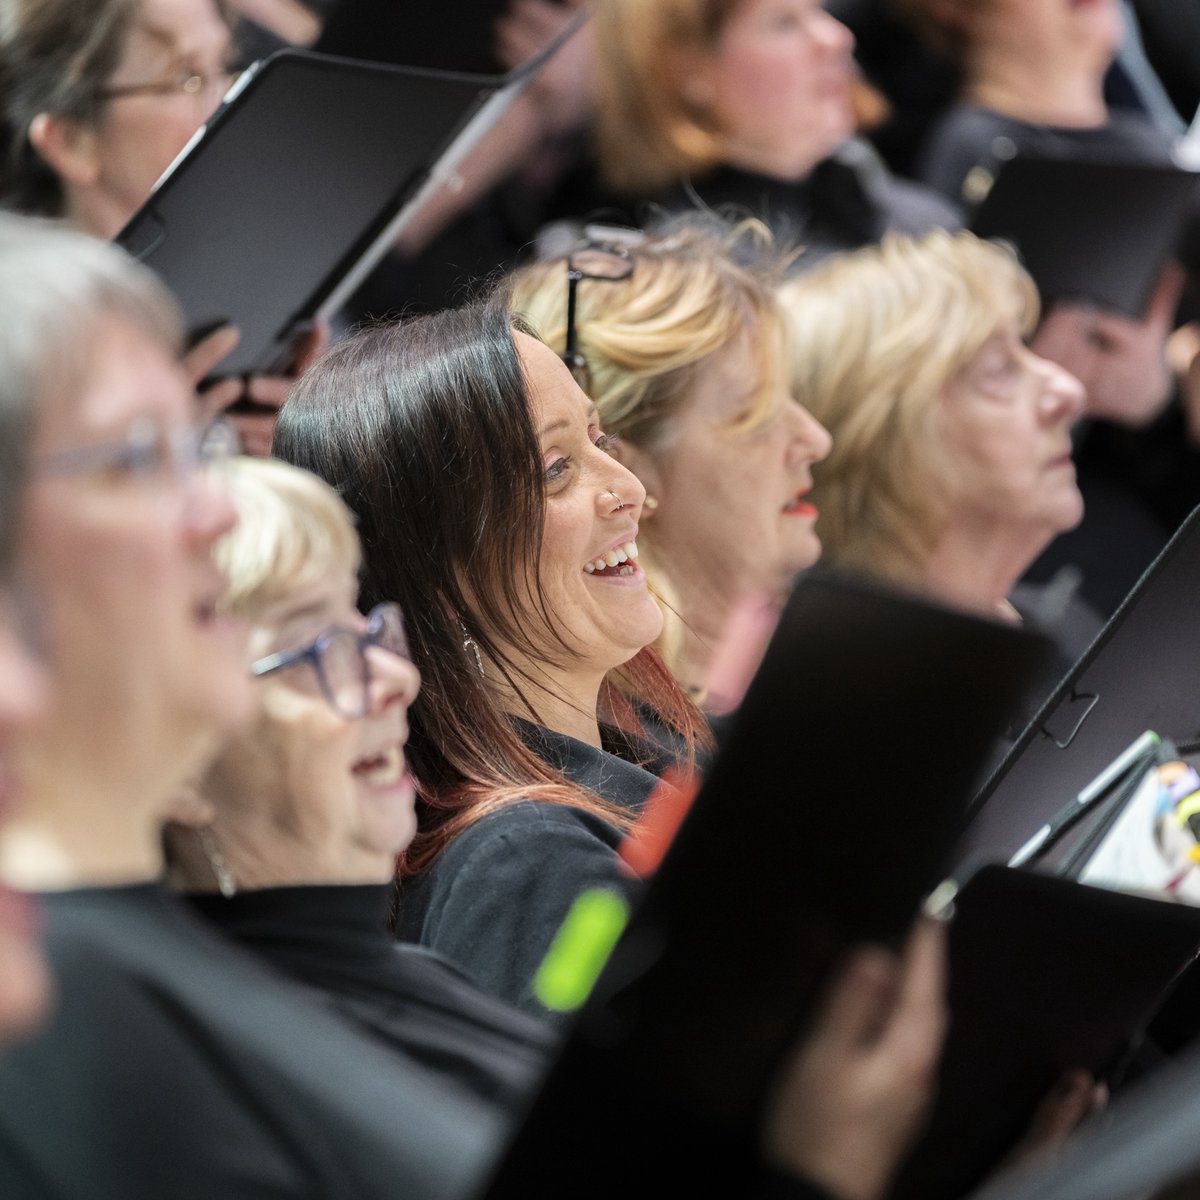 Become a Friend of Huddersfield Choral Society🎶⤵️ As a friend, you will be contributing towards the financial future of the choir and not only that, you'll receive a number of benefits- a little thank you from us, to you! Find out more here: huddersfieldchoral.com/become-a-friend